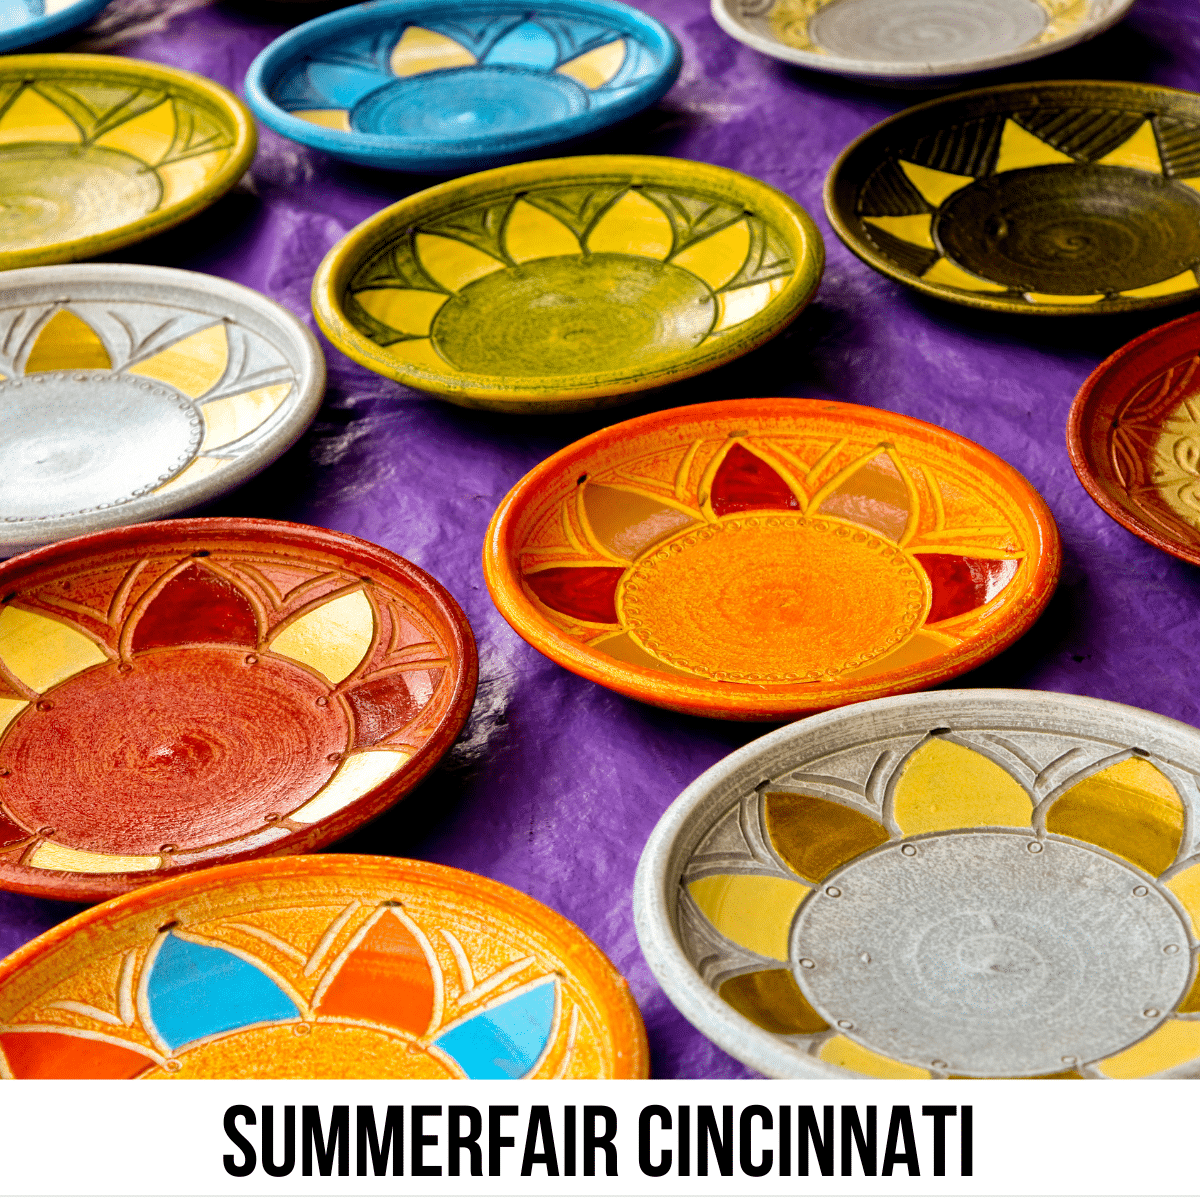 A square image of a photo of several colorful, glazed, ceramic dishes lined up on a table, covered in a purple tablecloth. A white strip across the bottom has text Summerfair Cincinnati.